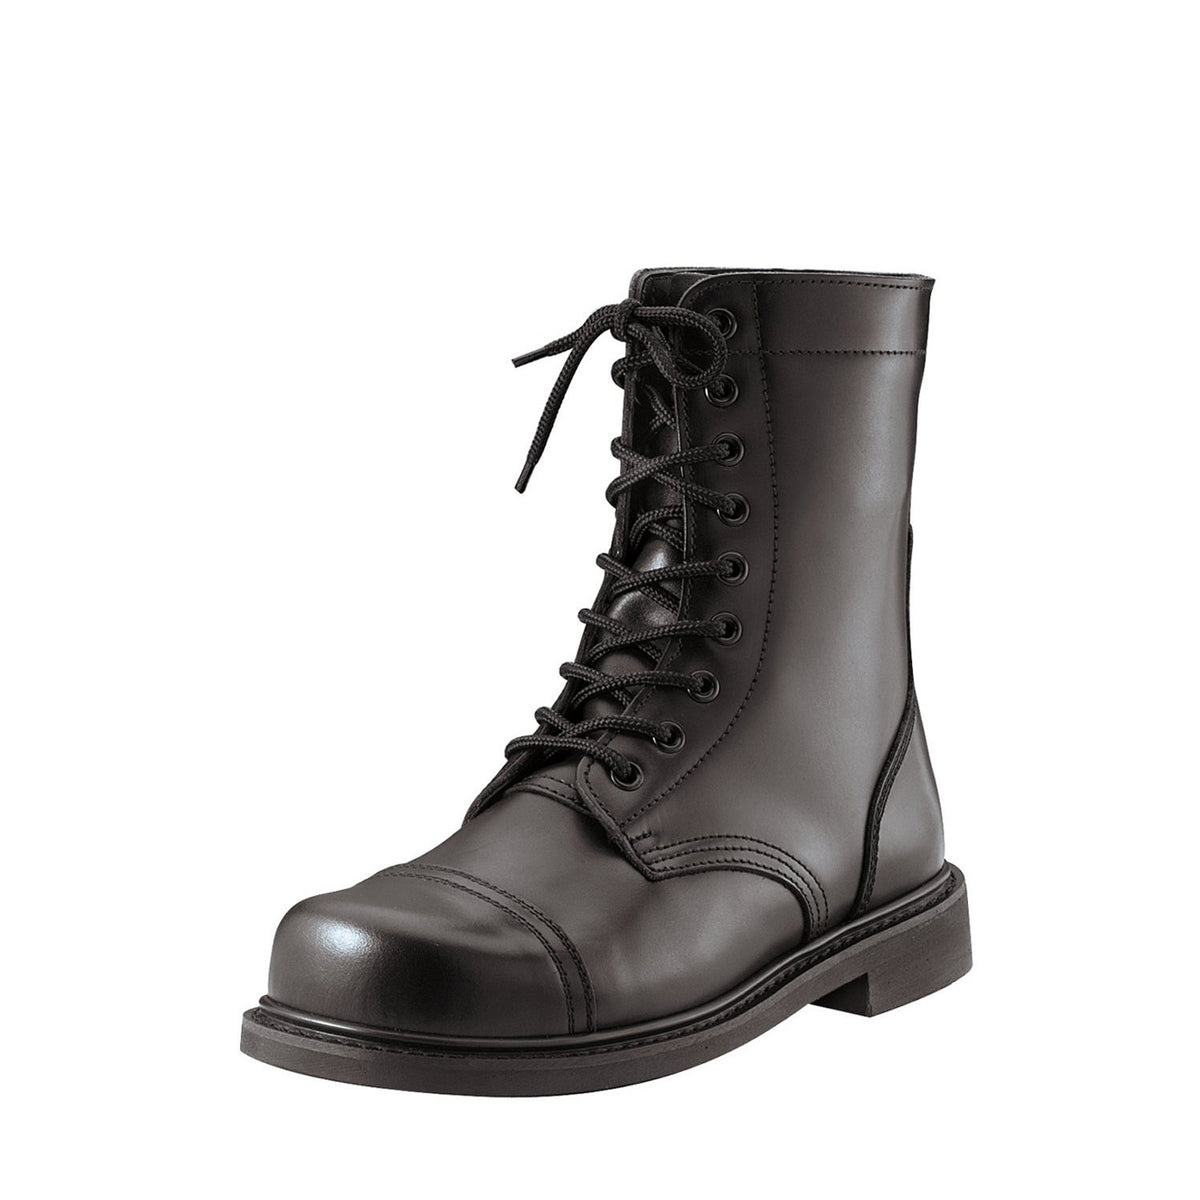 Rothco G.I. Type Combat Boots